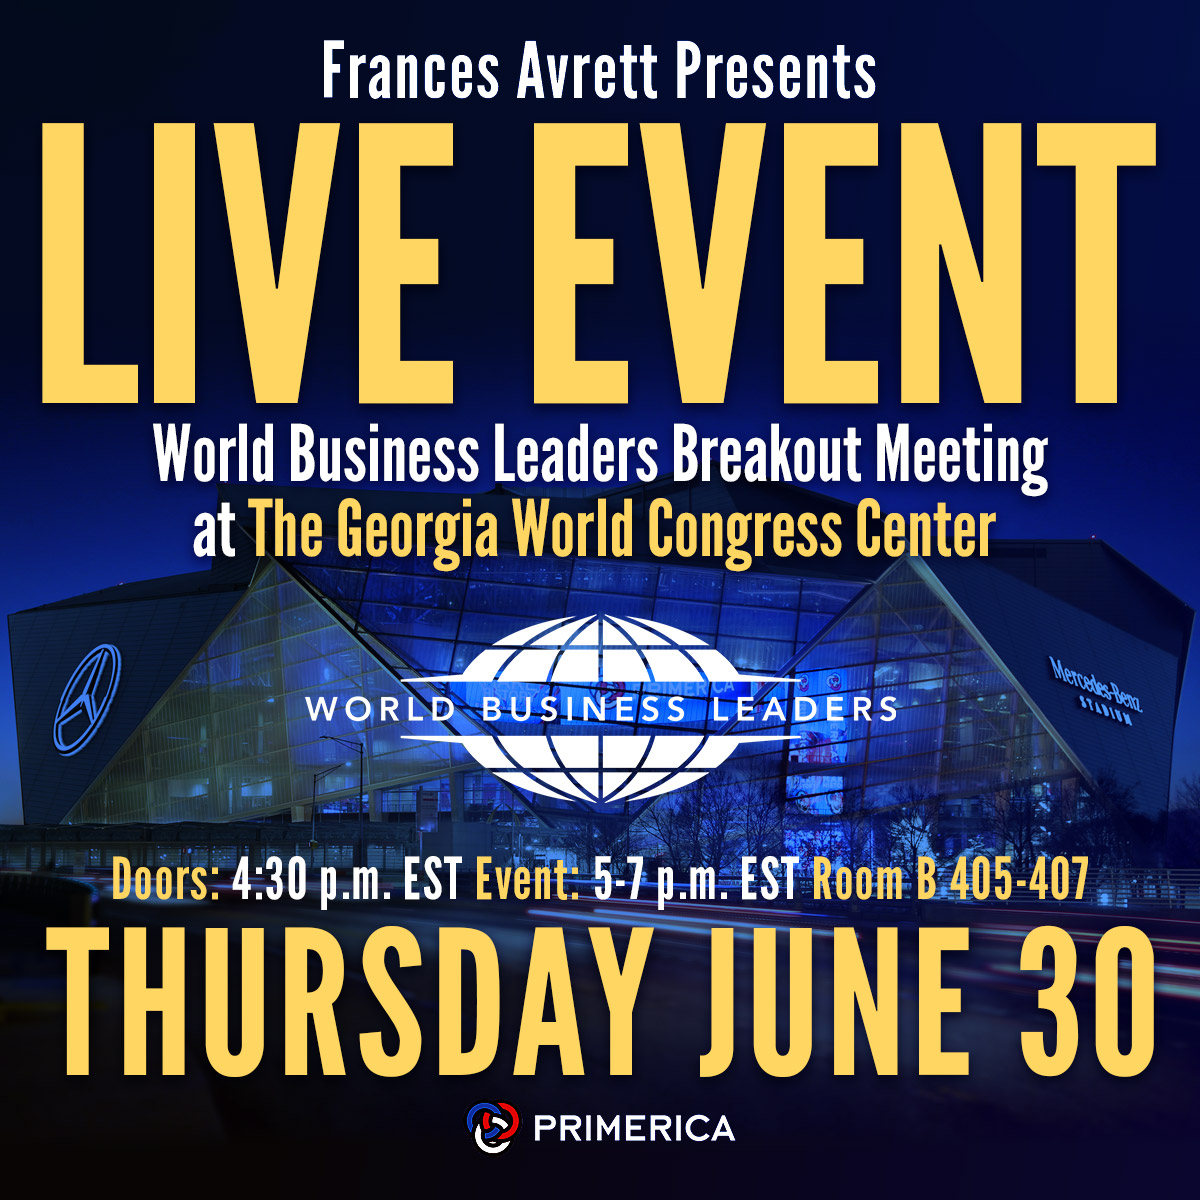 Event Graphic for World Business Leaders annual convention. 

Thursday, June 30

Yellow text